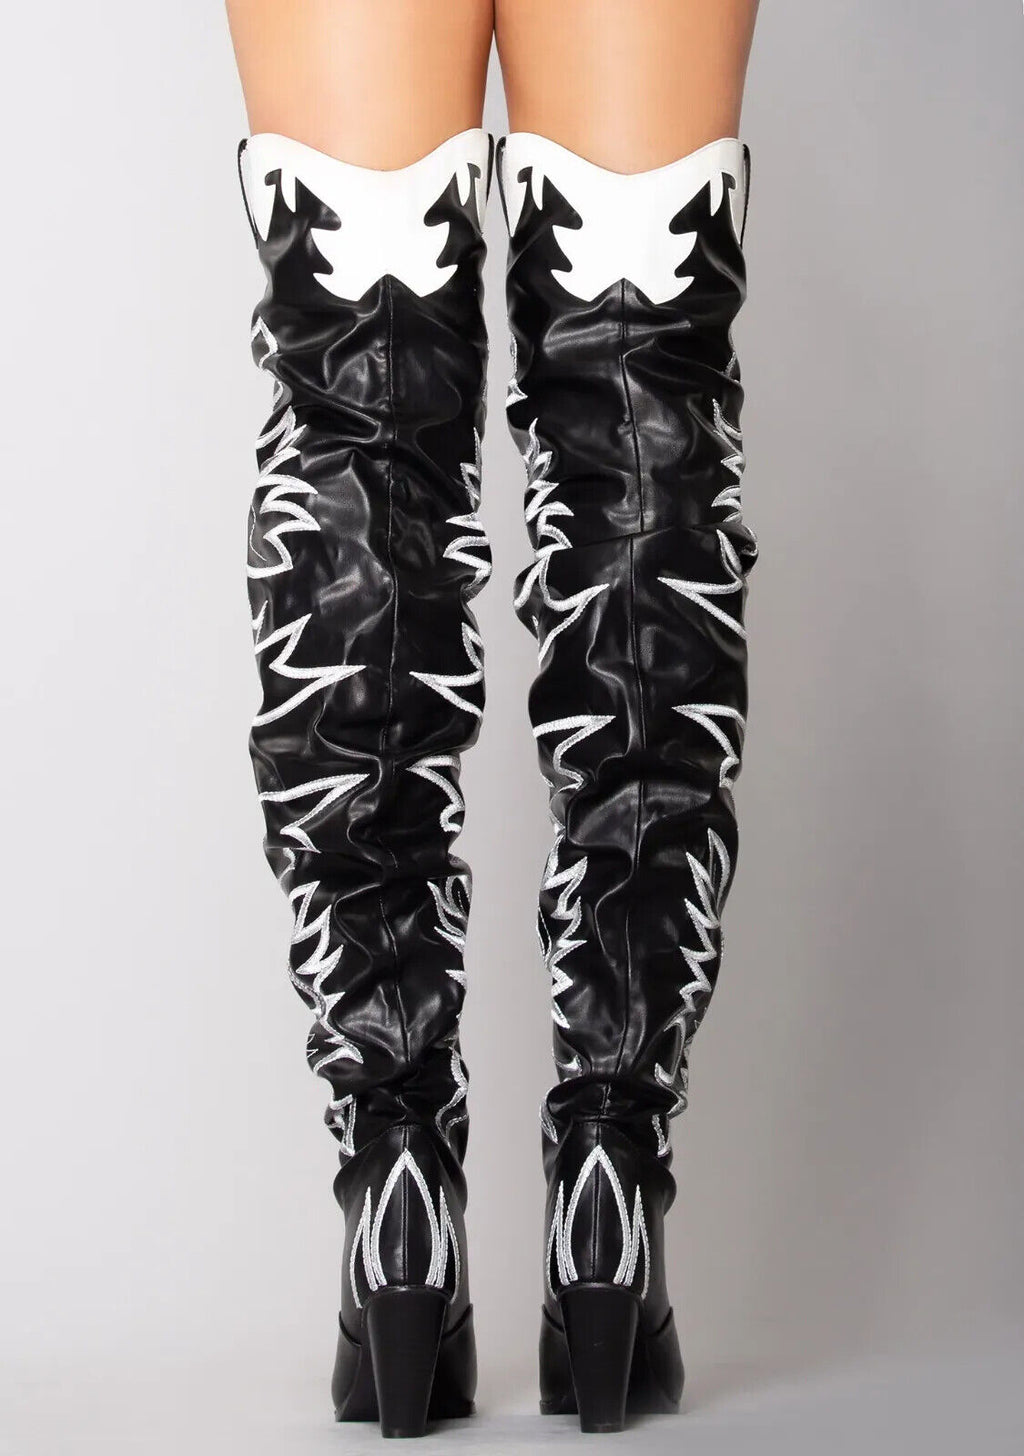 Kelsey 21 Rock Star Black & White Western Slouch OTK Thigh High Cowboy Boots - Totally Wicked Footwear